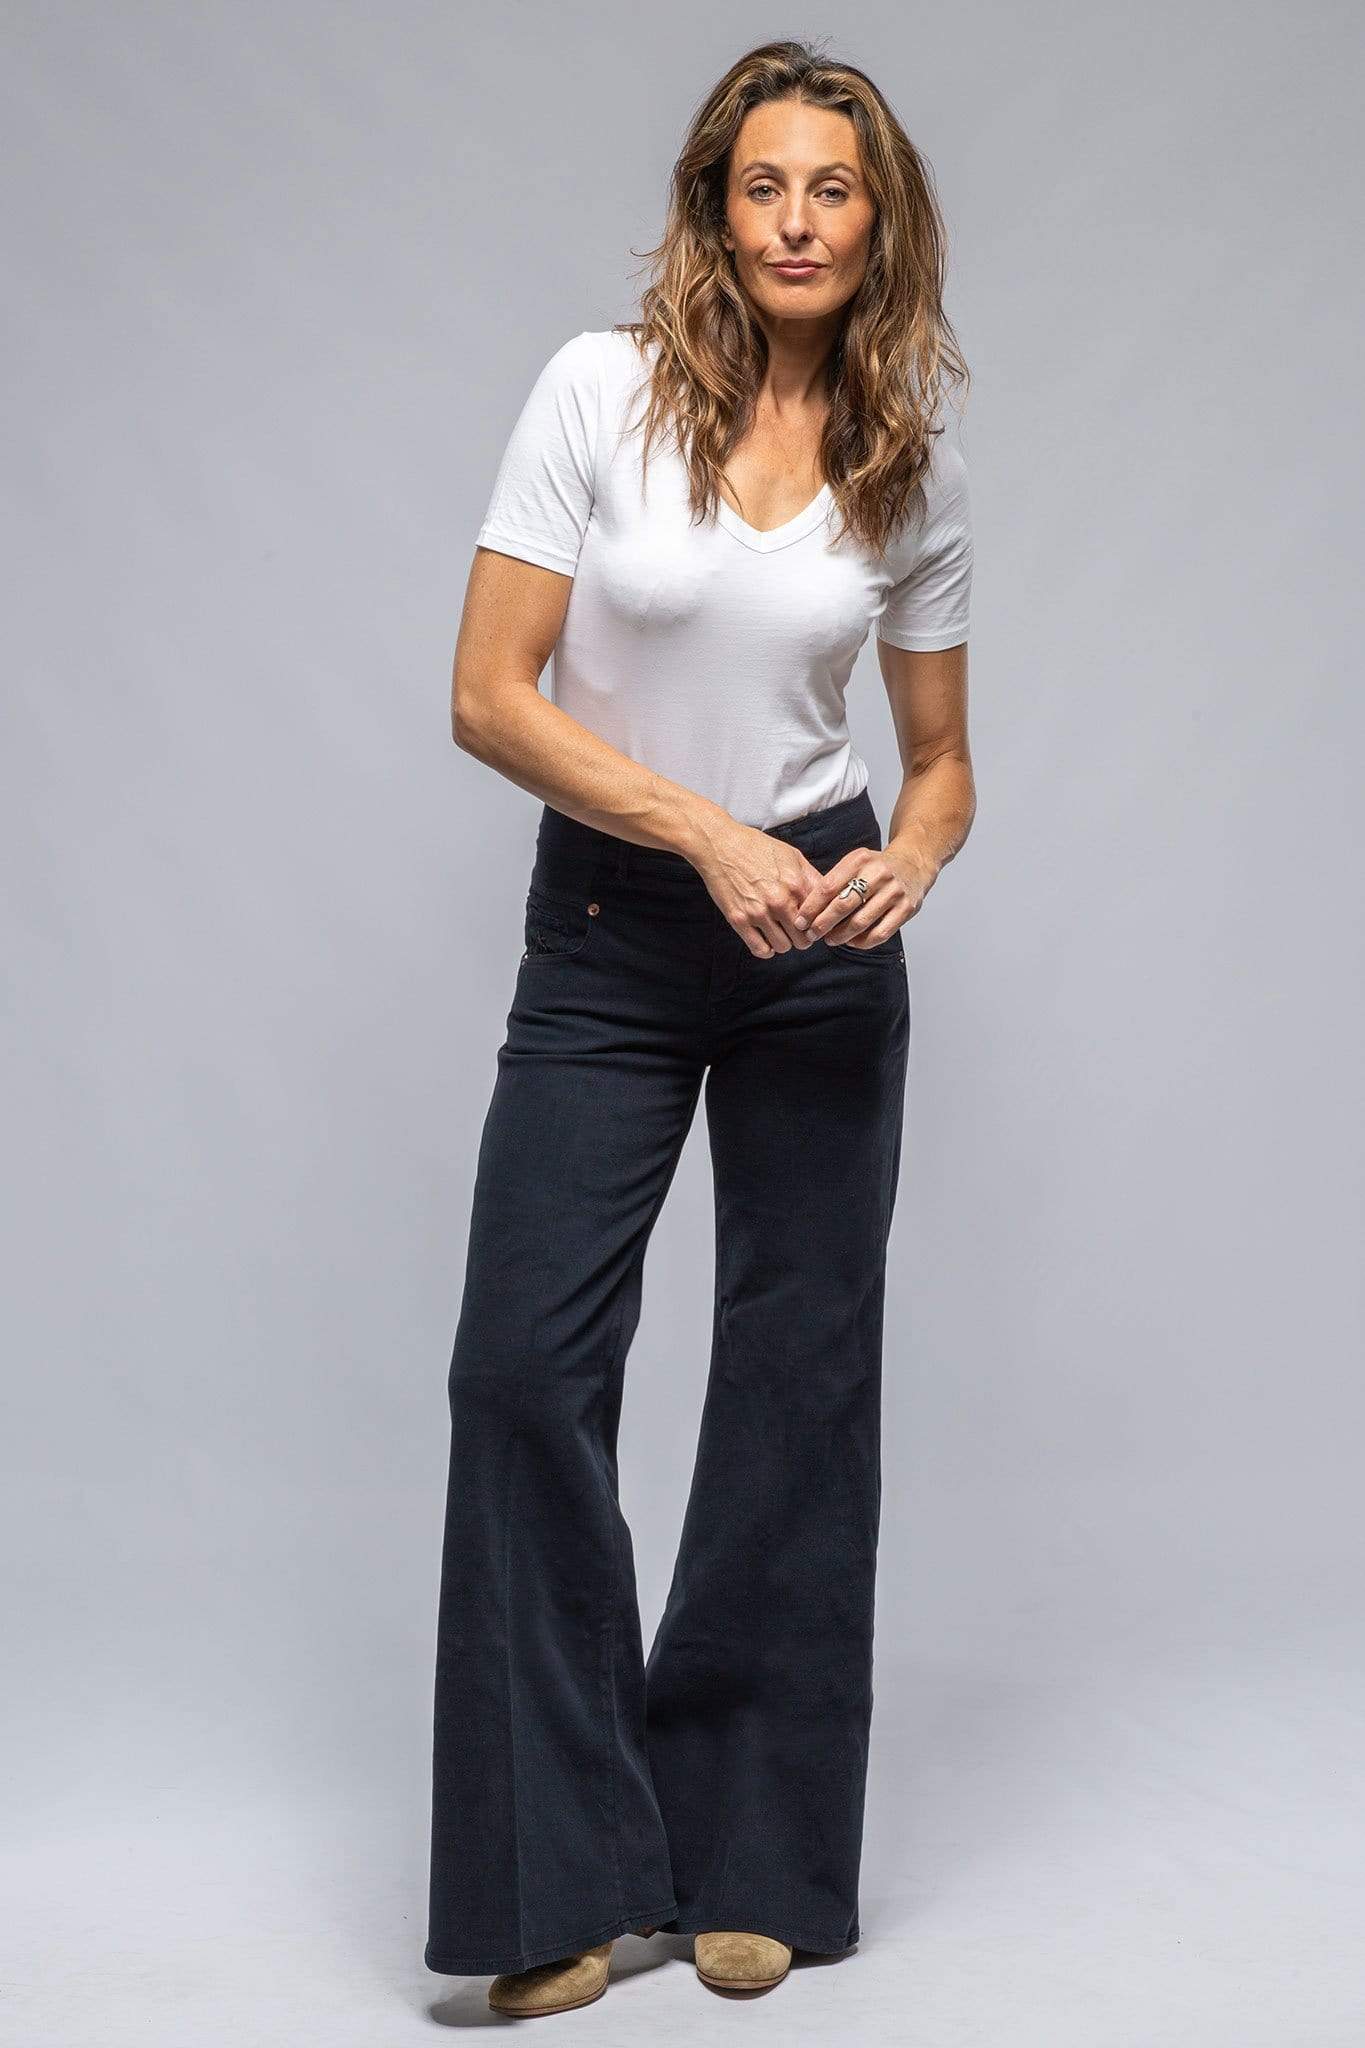 Stretch Pants For Ladies, Shop 92 items